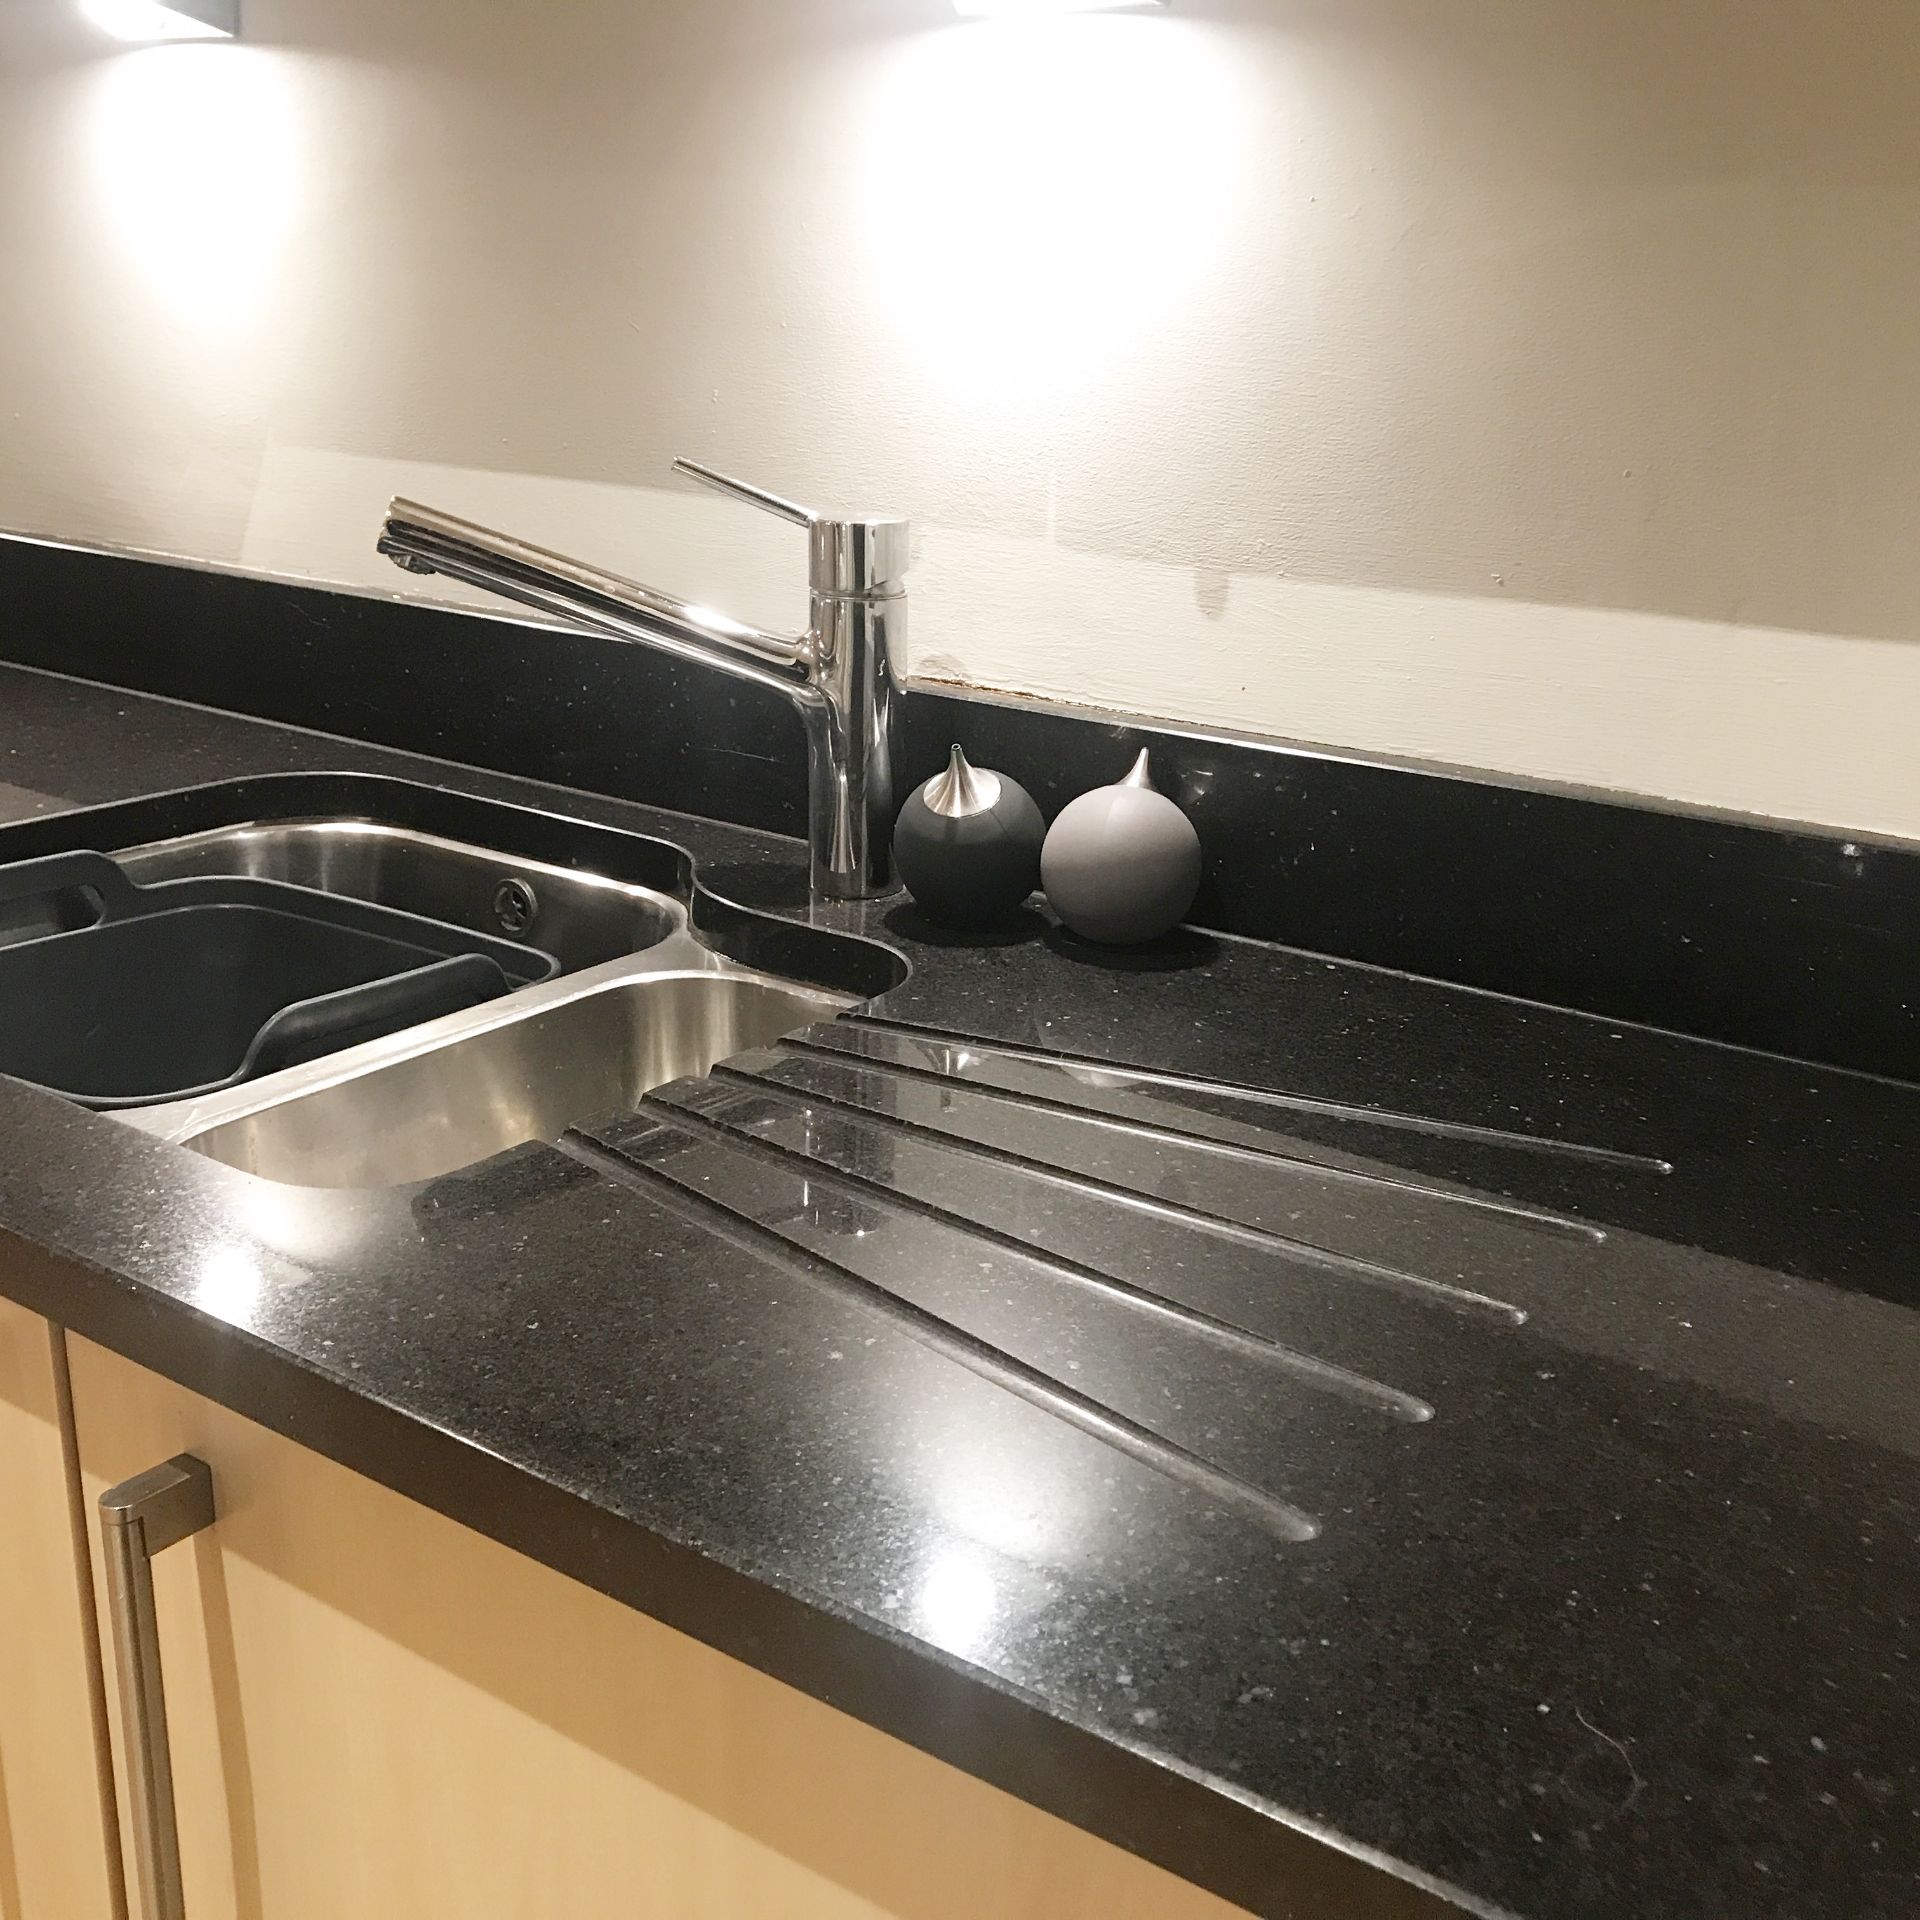 1 x Fitted Kitchen Featuring Birch Soft Close Doors, Black Granite Worktops and Zanussi Appliances - - Image 20 of 51